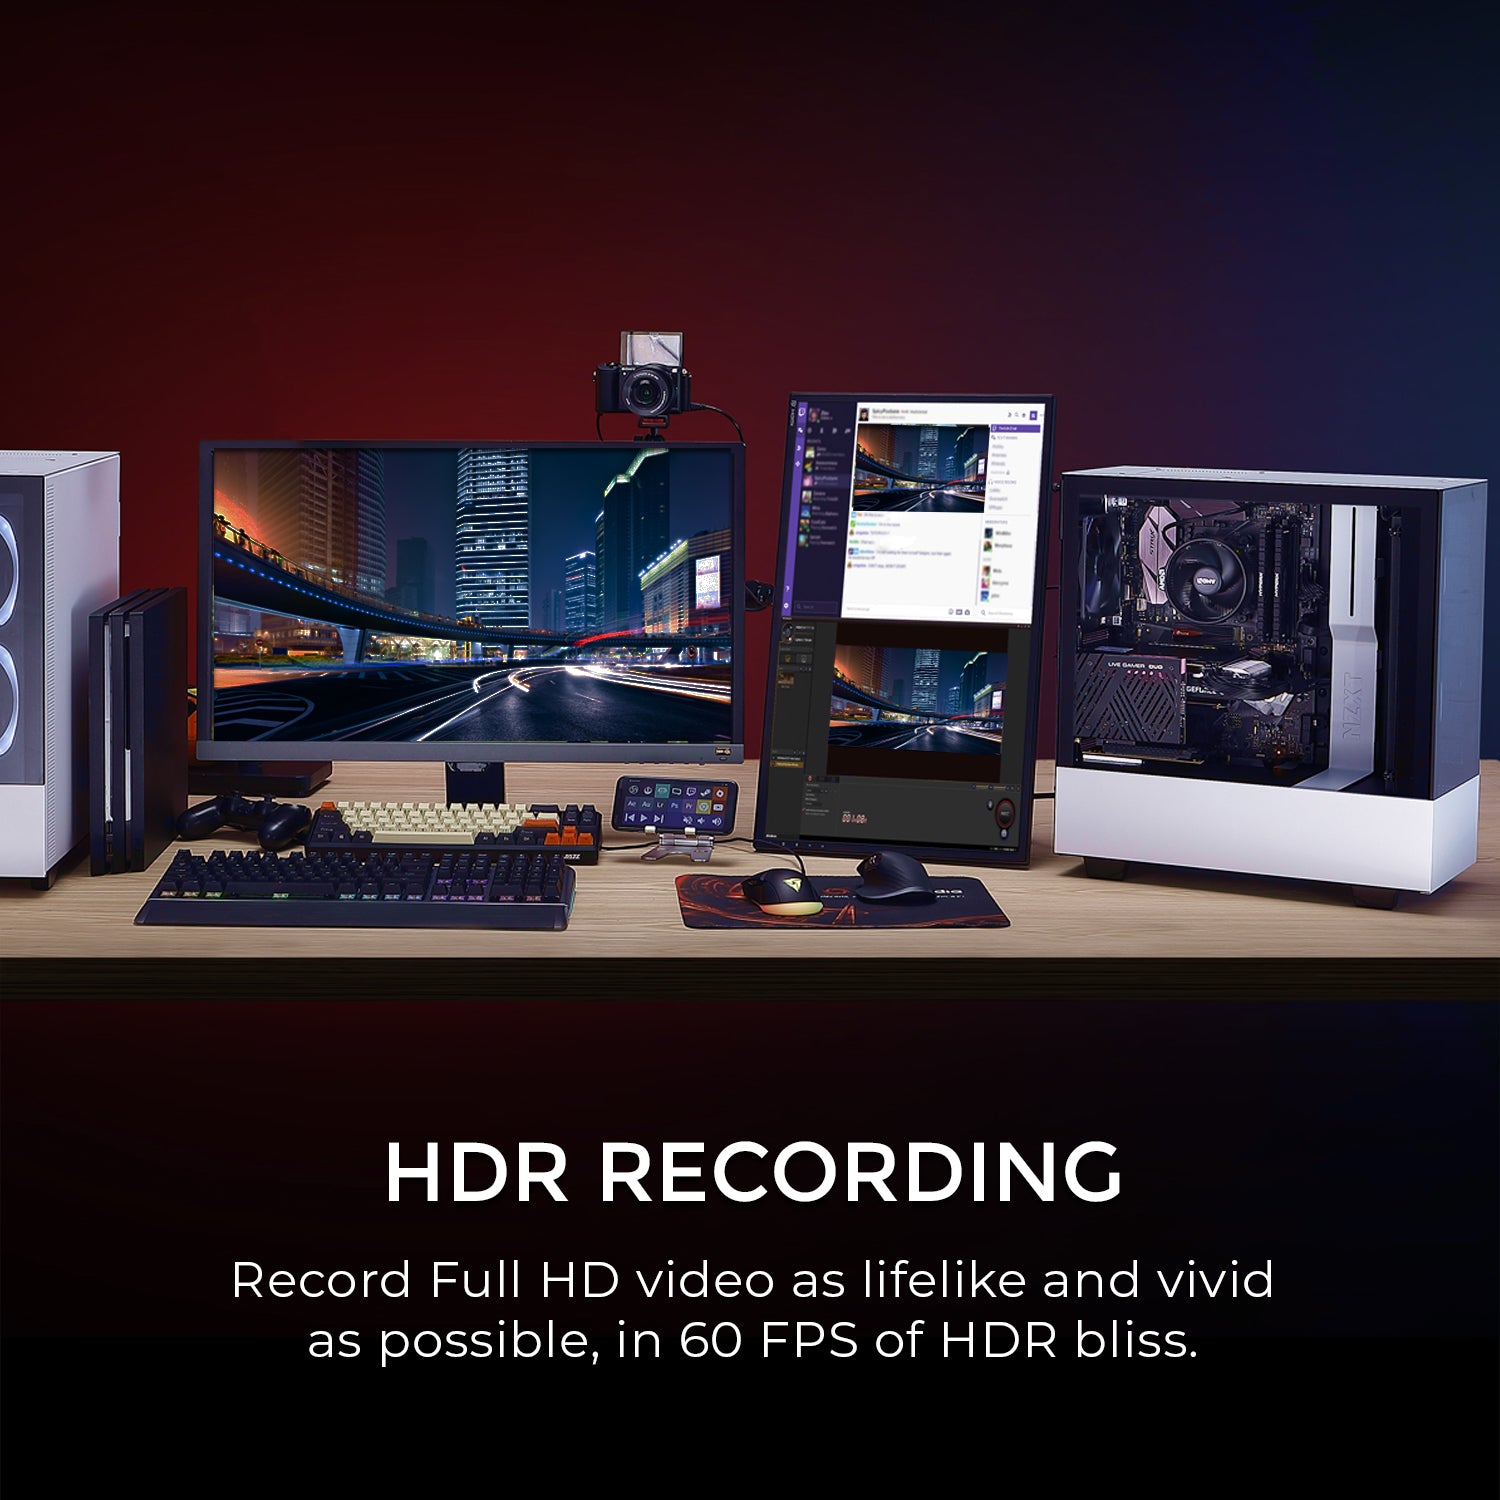 HDR Recording: Record Full HD video as lifelike and vivid as possible in 60 FPS of HDR bliss.